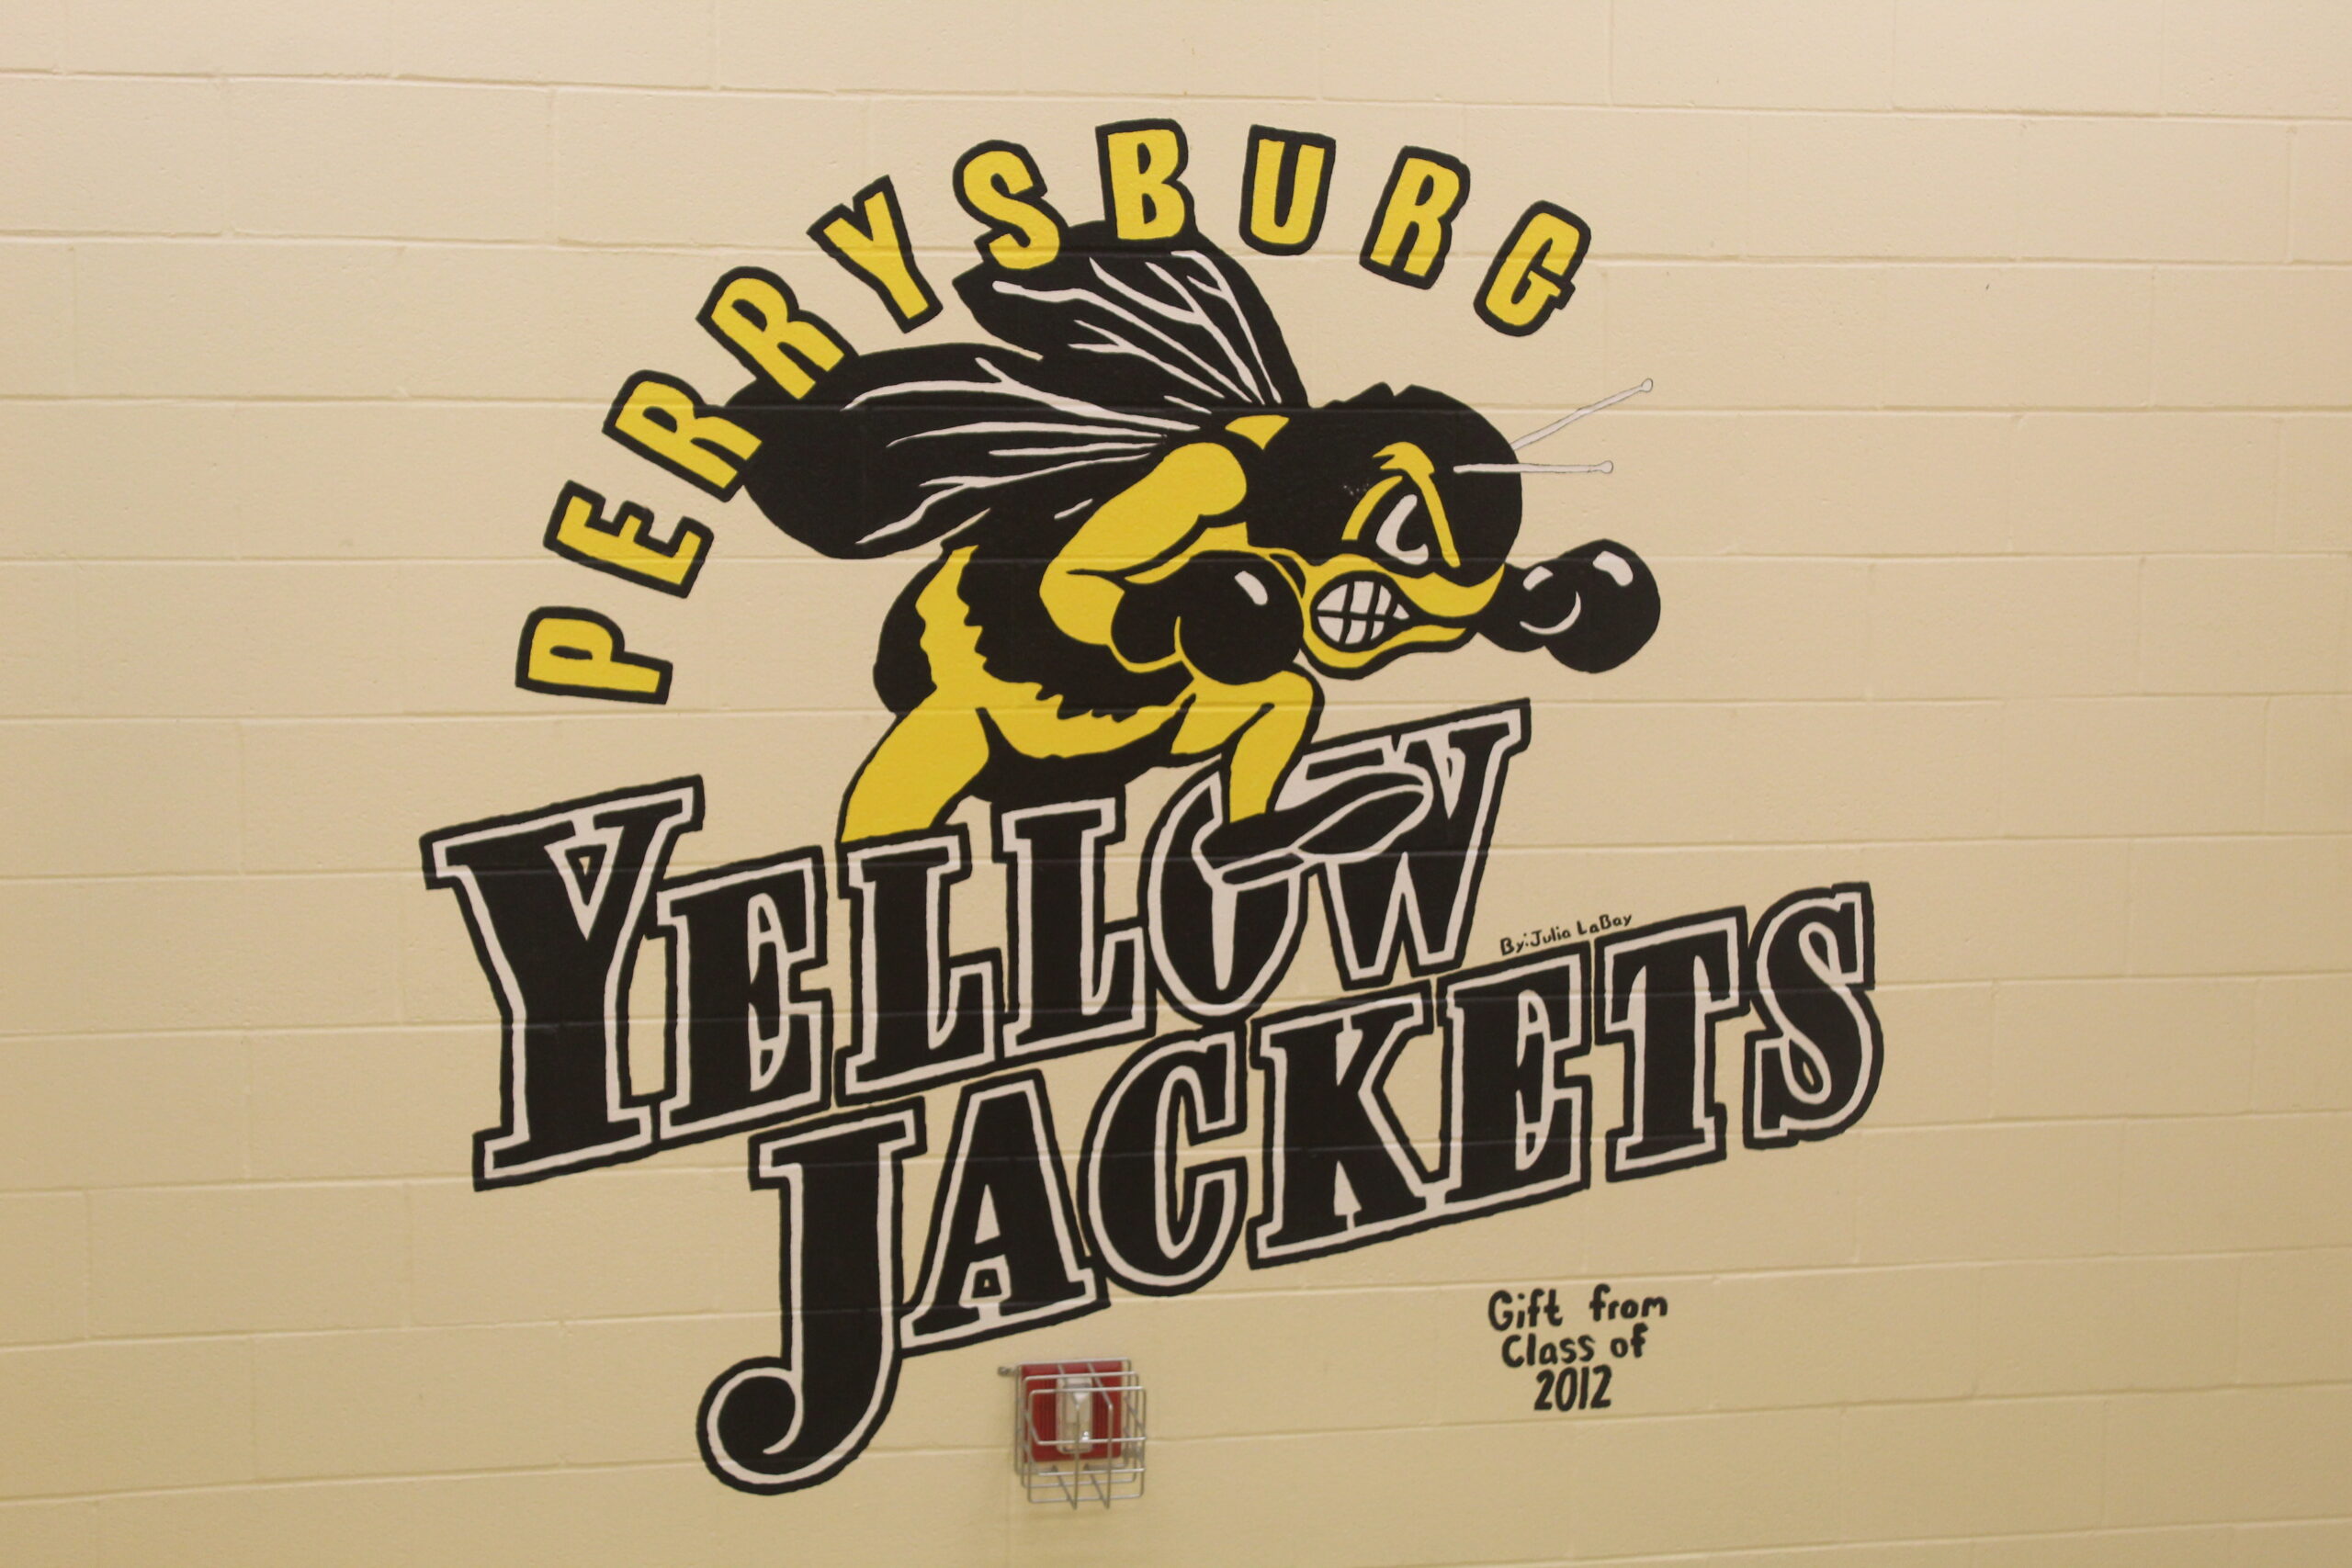 Painting of a yellow jacket, reads Perrysburg yellow jackets gift from class of 2012